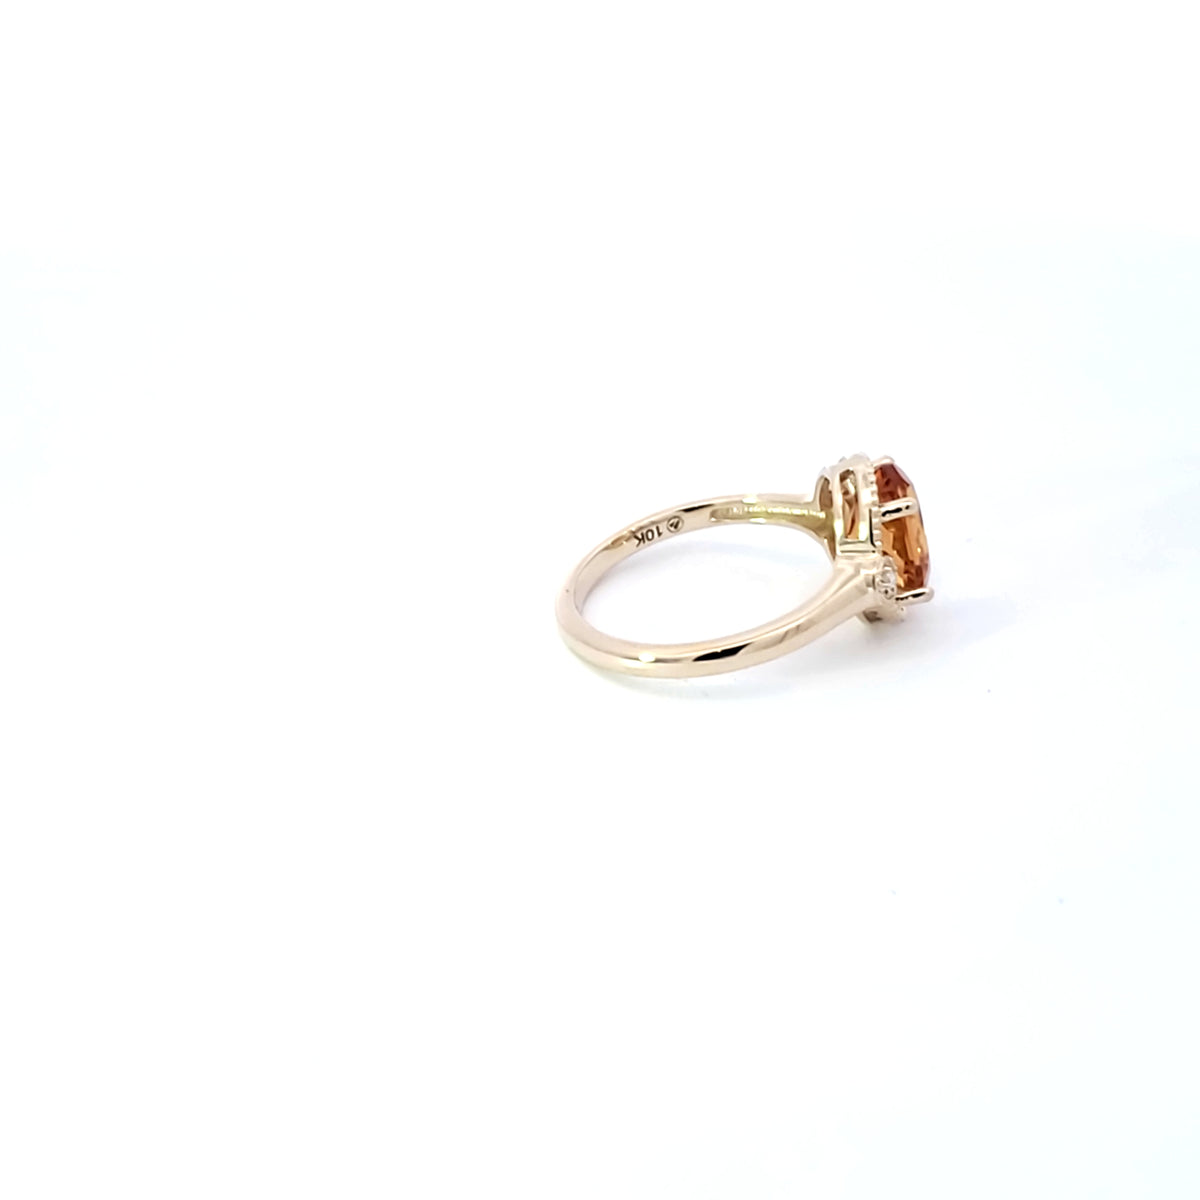 10K Yellow Gold  Citrine and Diamond Ring - Size 7